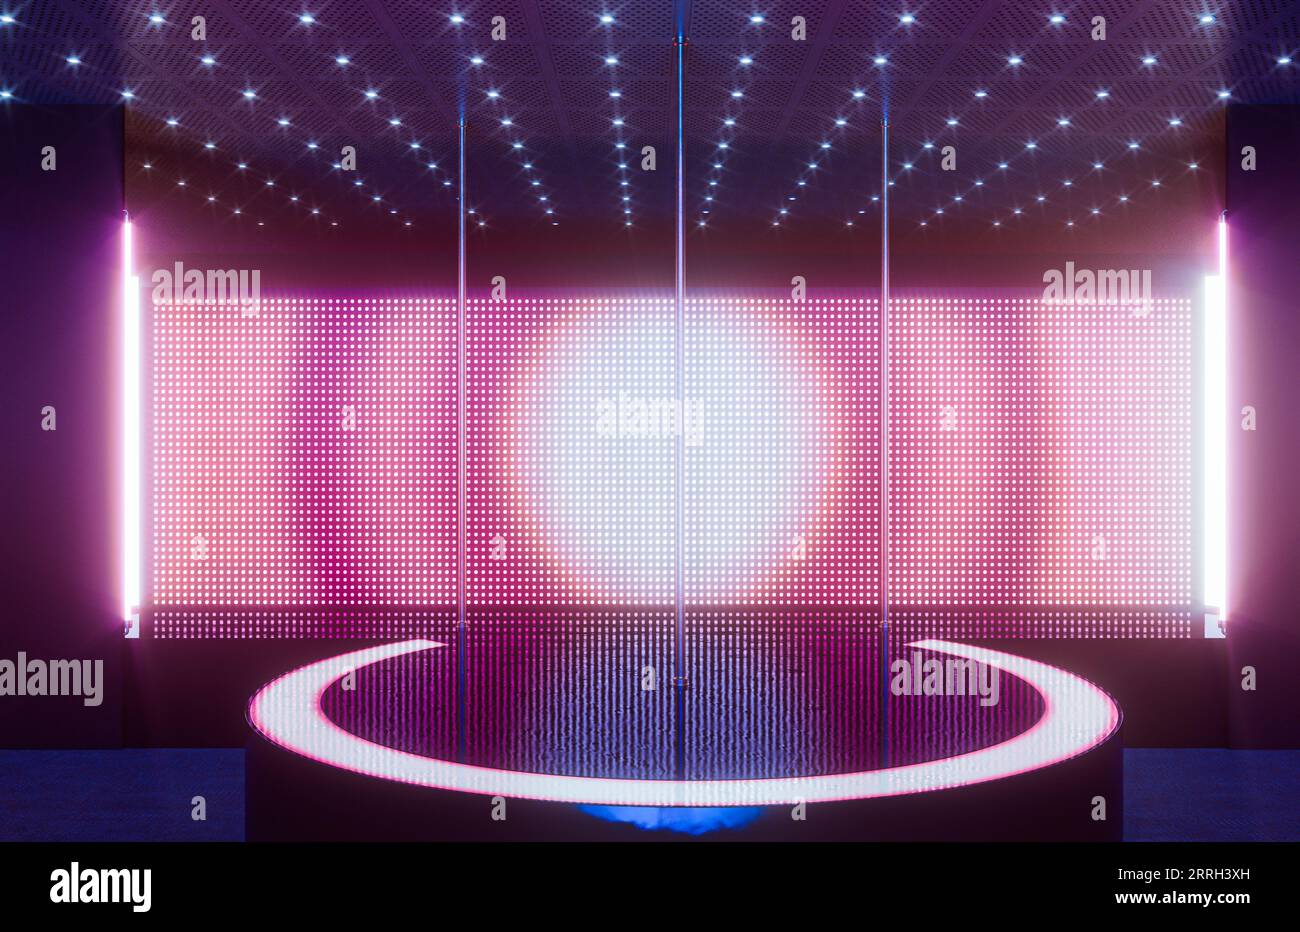 An empty strip club dancing stage with three poles and an illuminated LED screen backdrop - 3D render Stock Photo